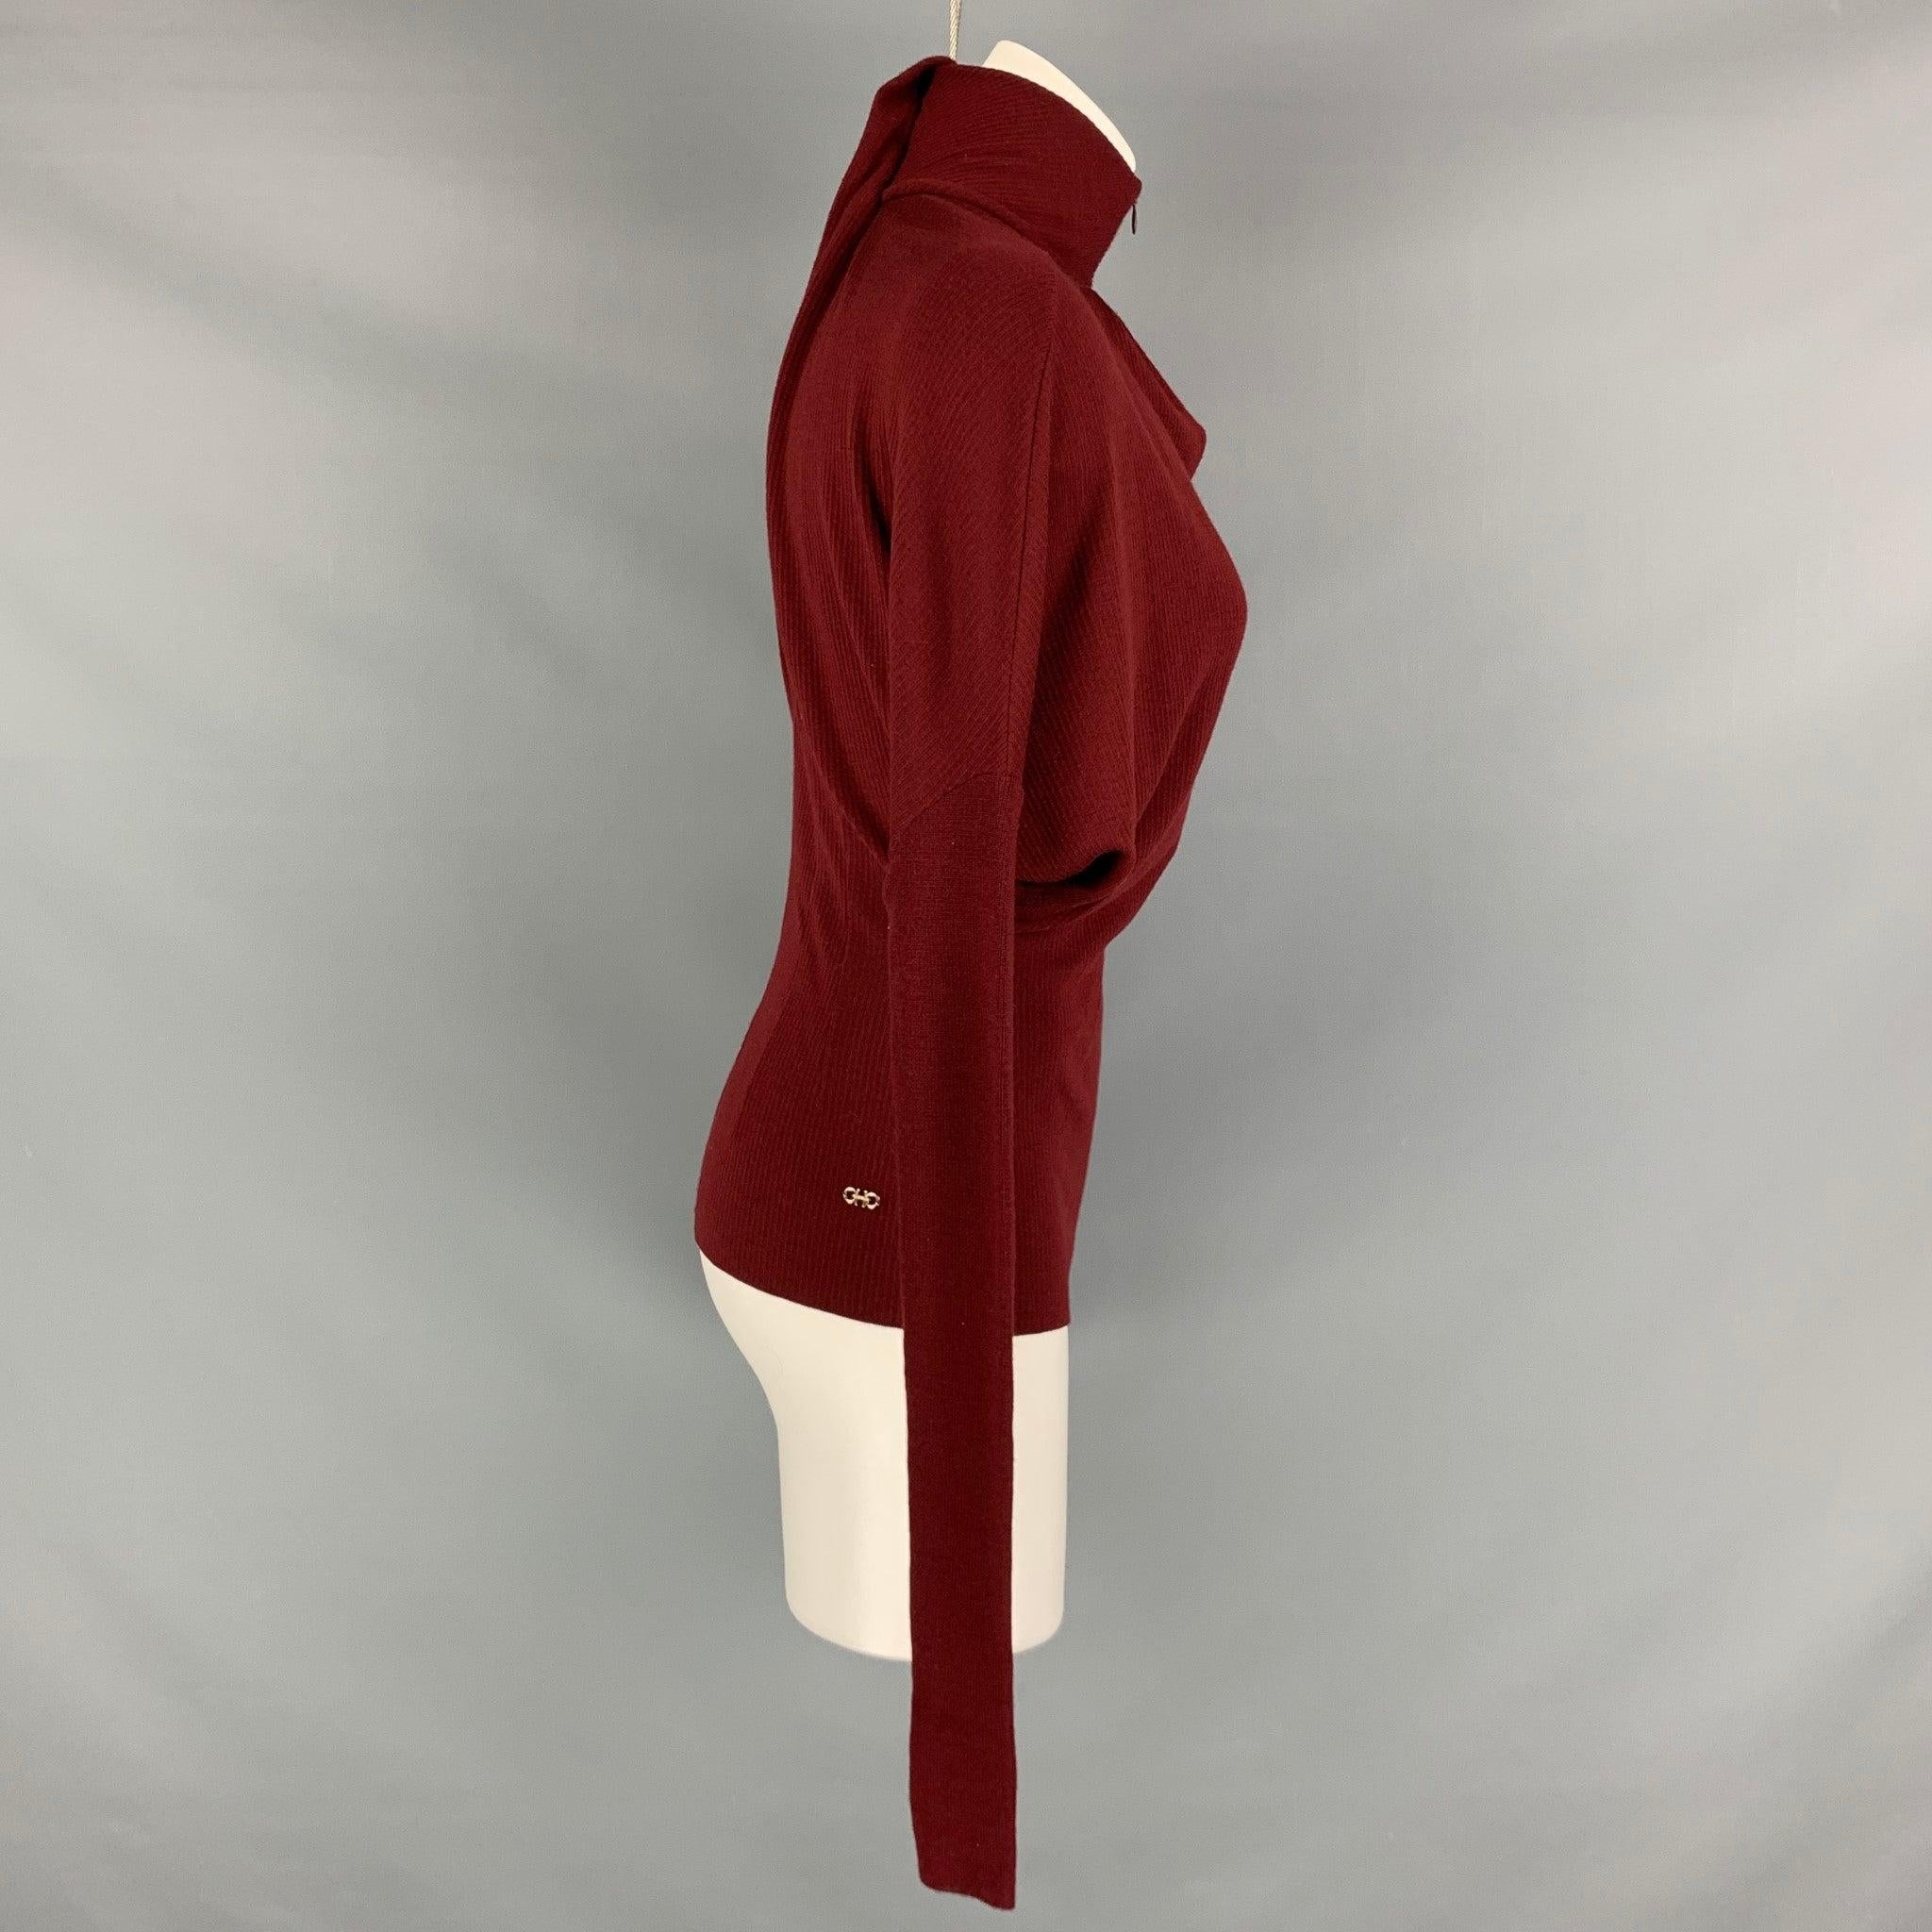 SALVATORE FERRAGAMO pullover comes in burgundy virgin wool ribbed knit material features a Dolman sleeves and high neck. Made in Italy.Excellent Pre-Owned Condition. 

Marked:   XS 

Measurements: 
 
Shoulder: 16 inches Chest: 36 inches Sleeve: 28